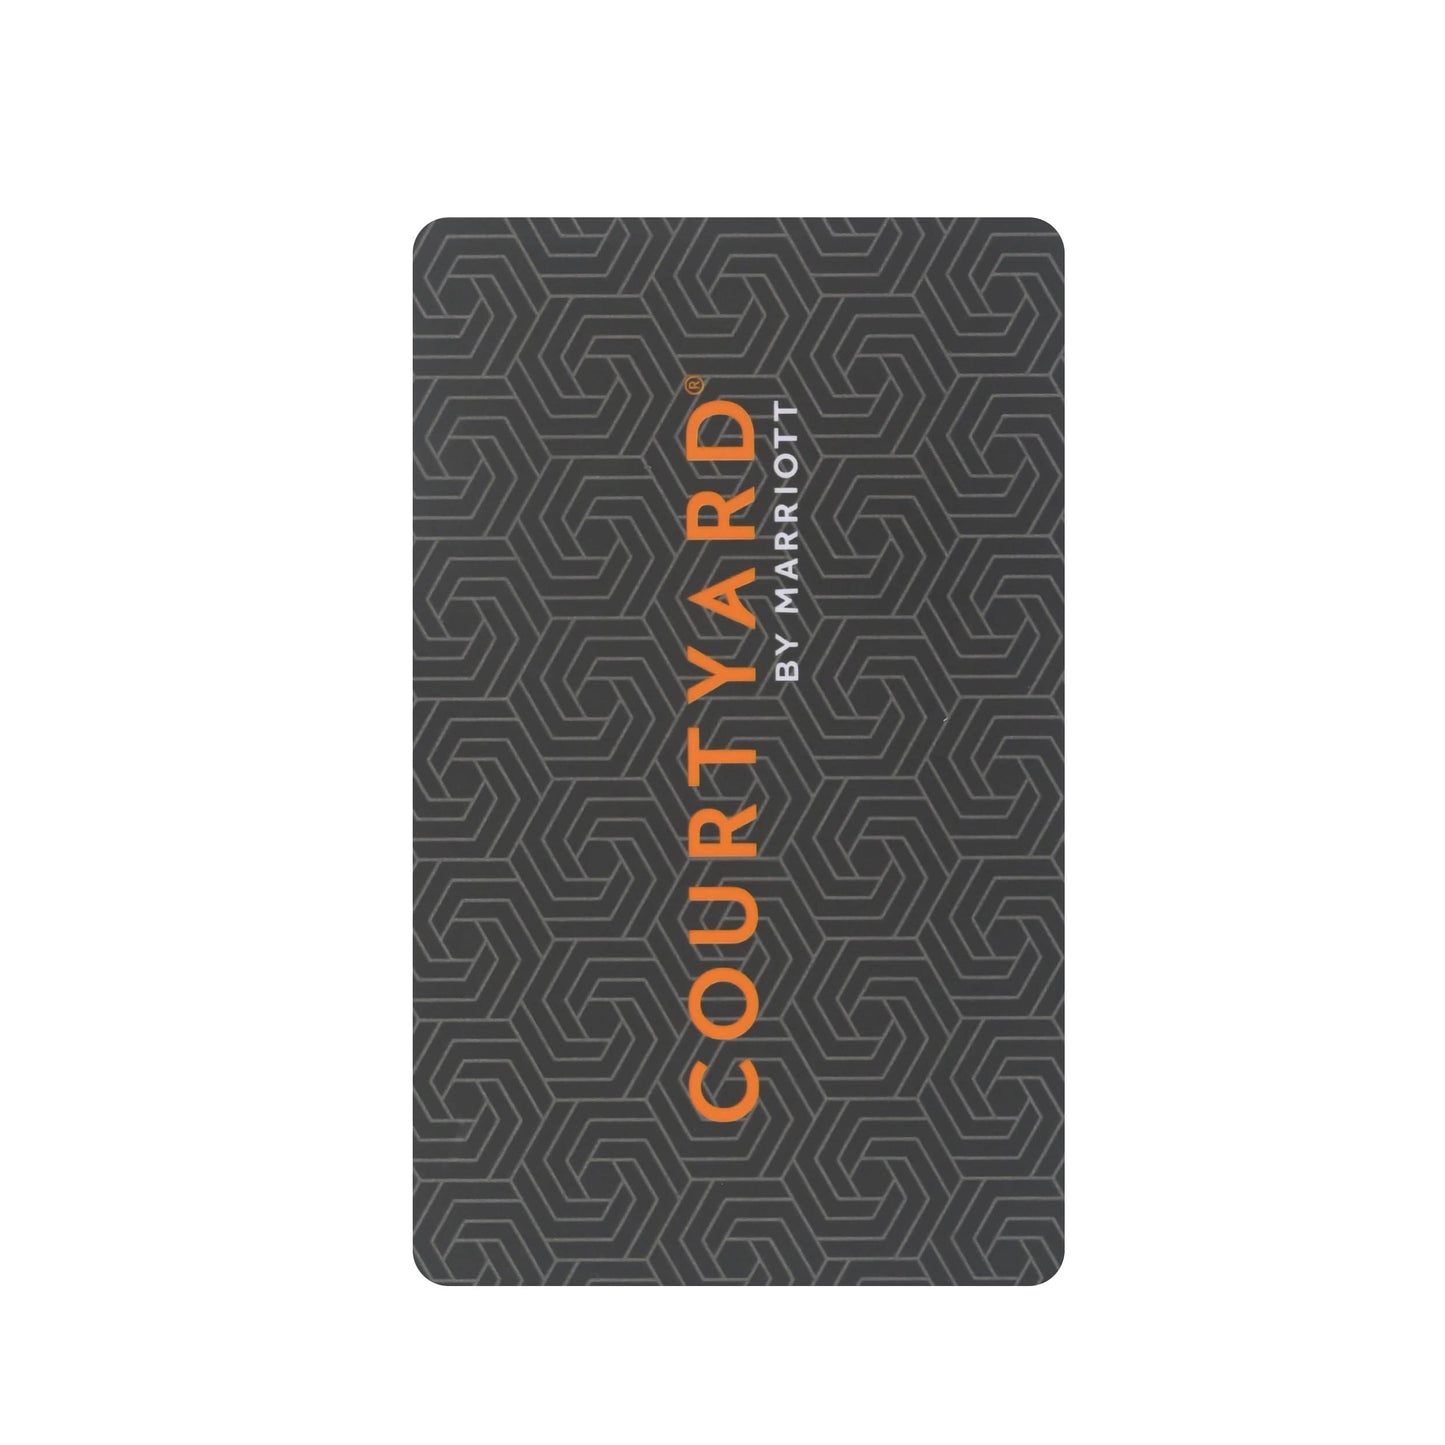 Courtyard Black 1K RFID Key Cards Compatible with Assa Abloy* Guest Lock Systems-See Description (Sold in boxes of 200)